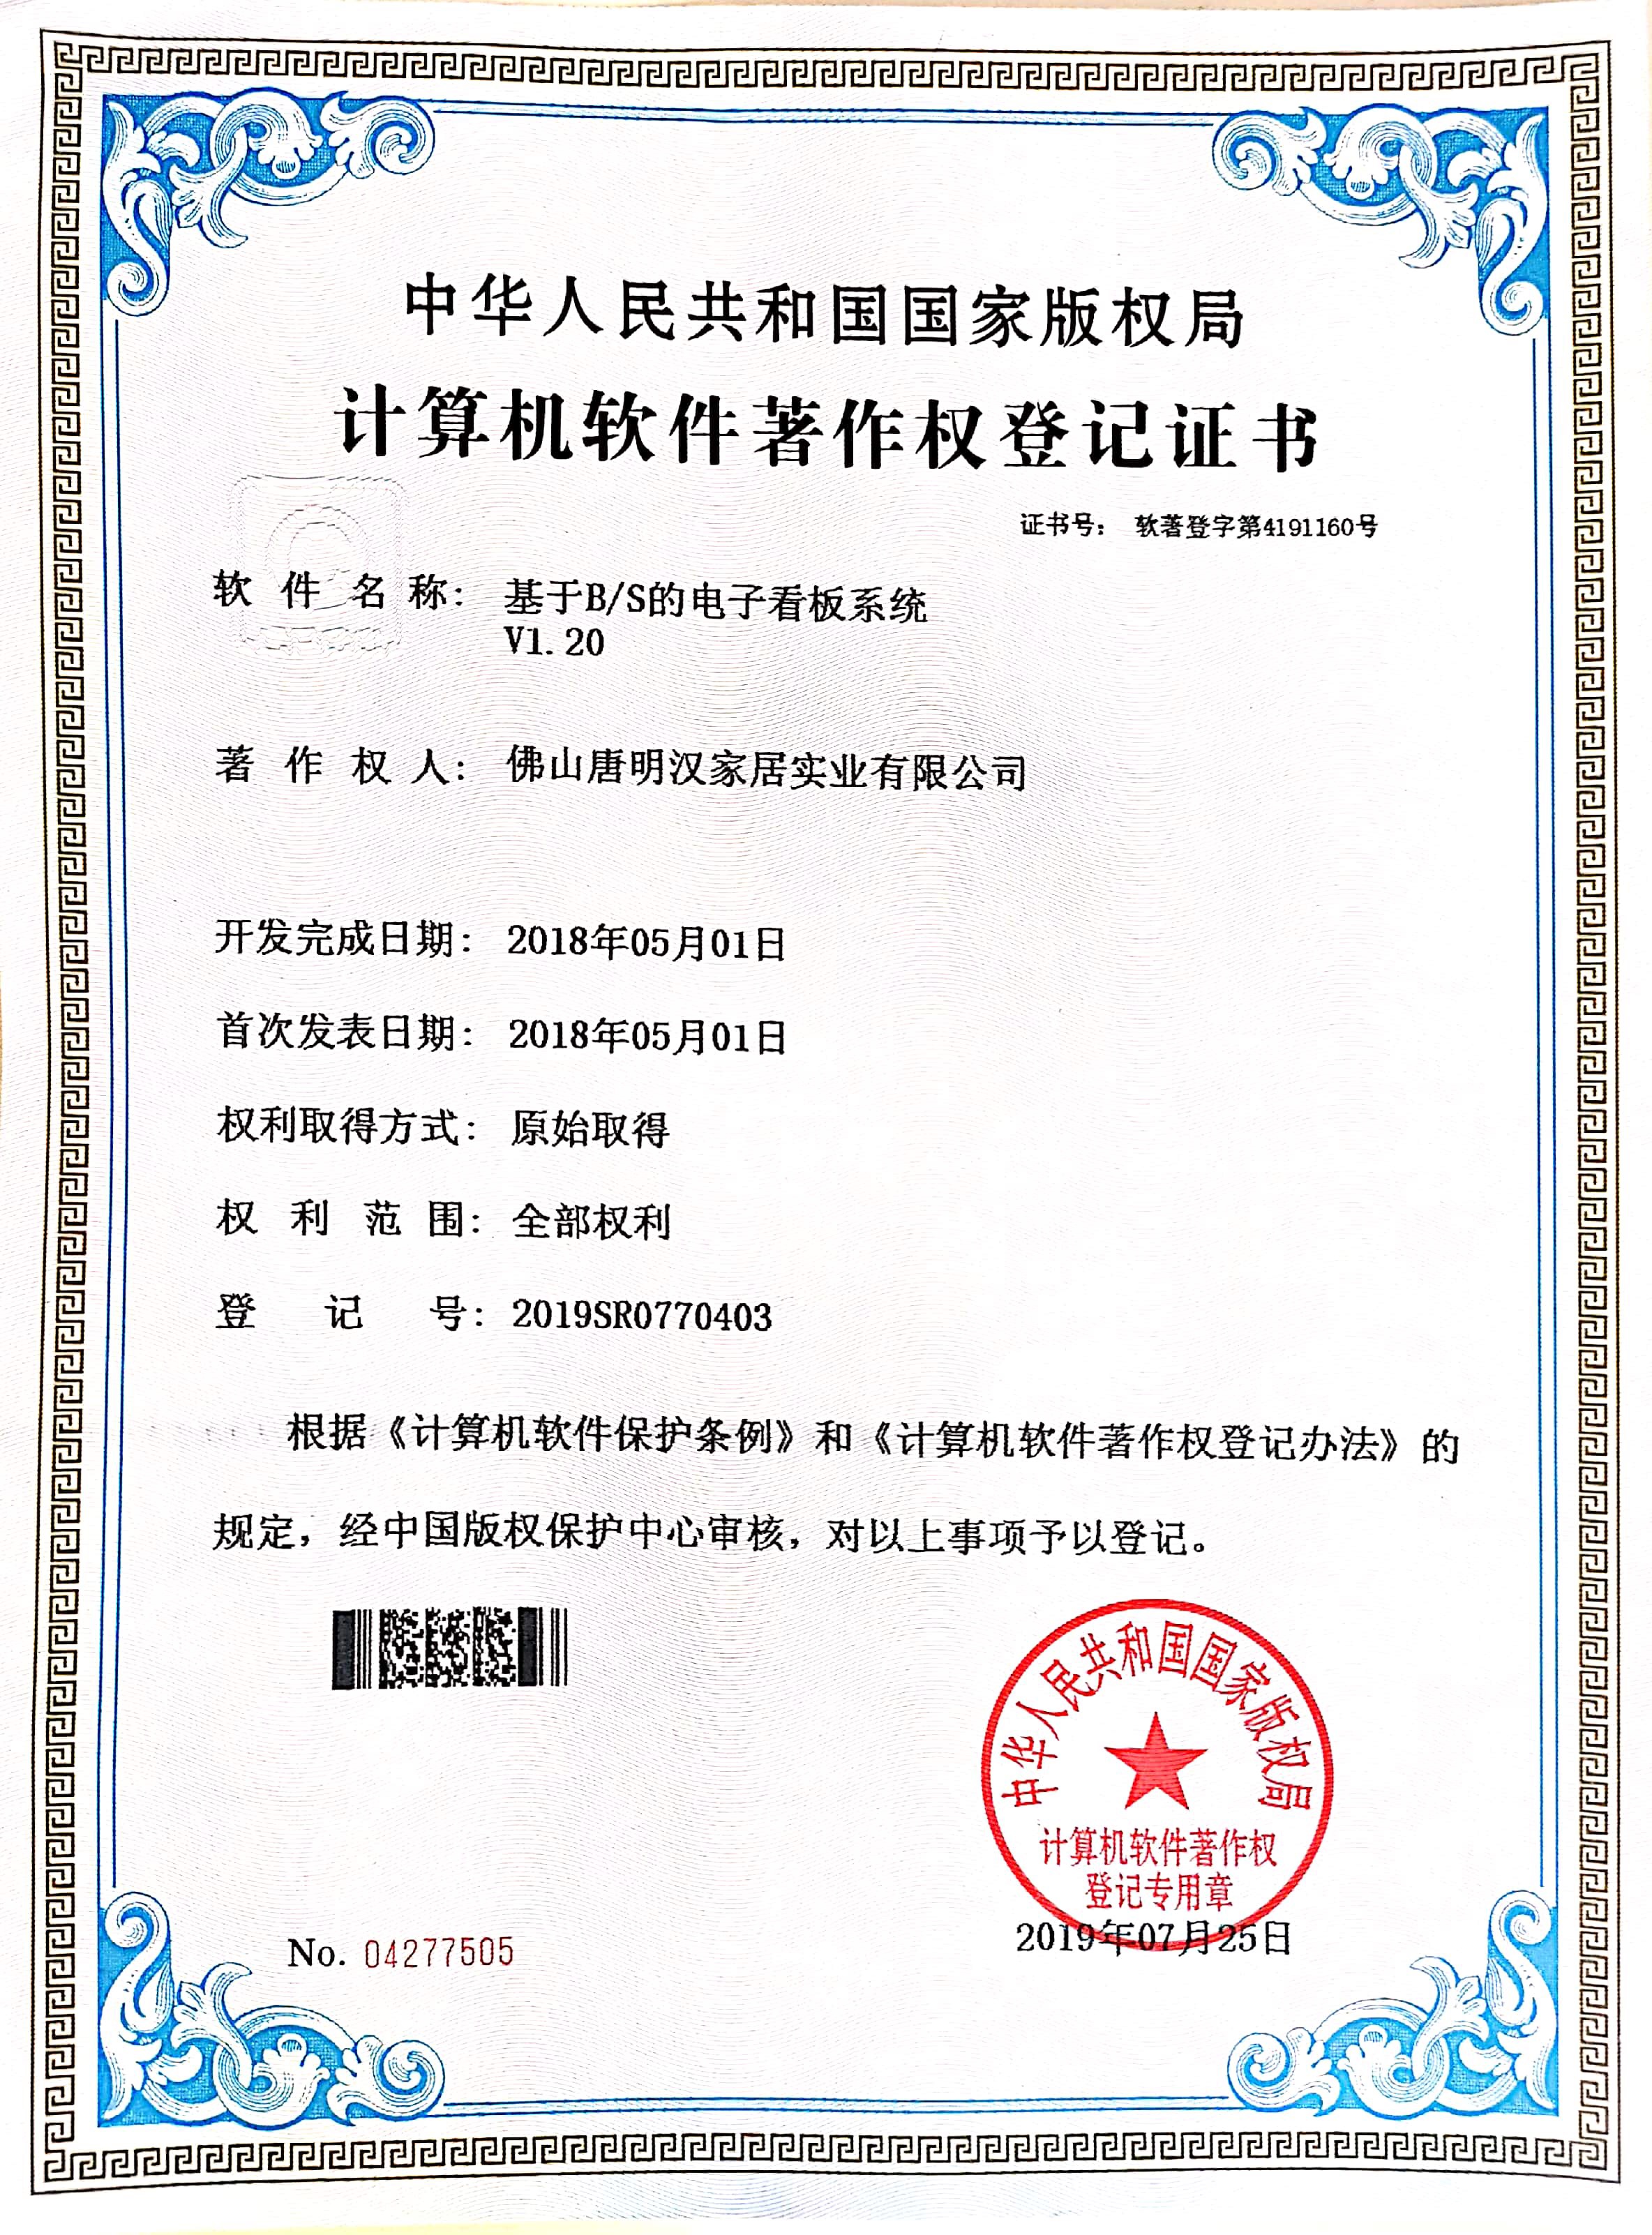 Patent certificate of electronic screen system v1.20 based on BS